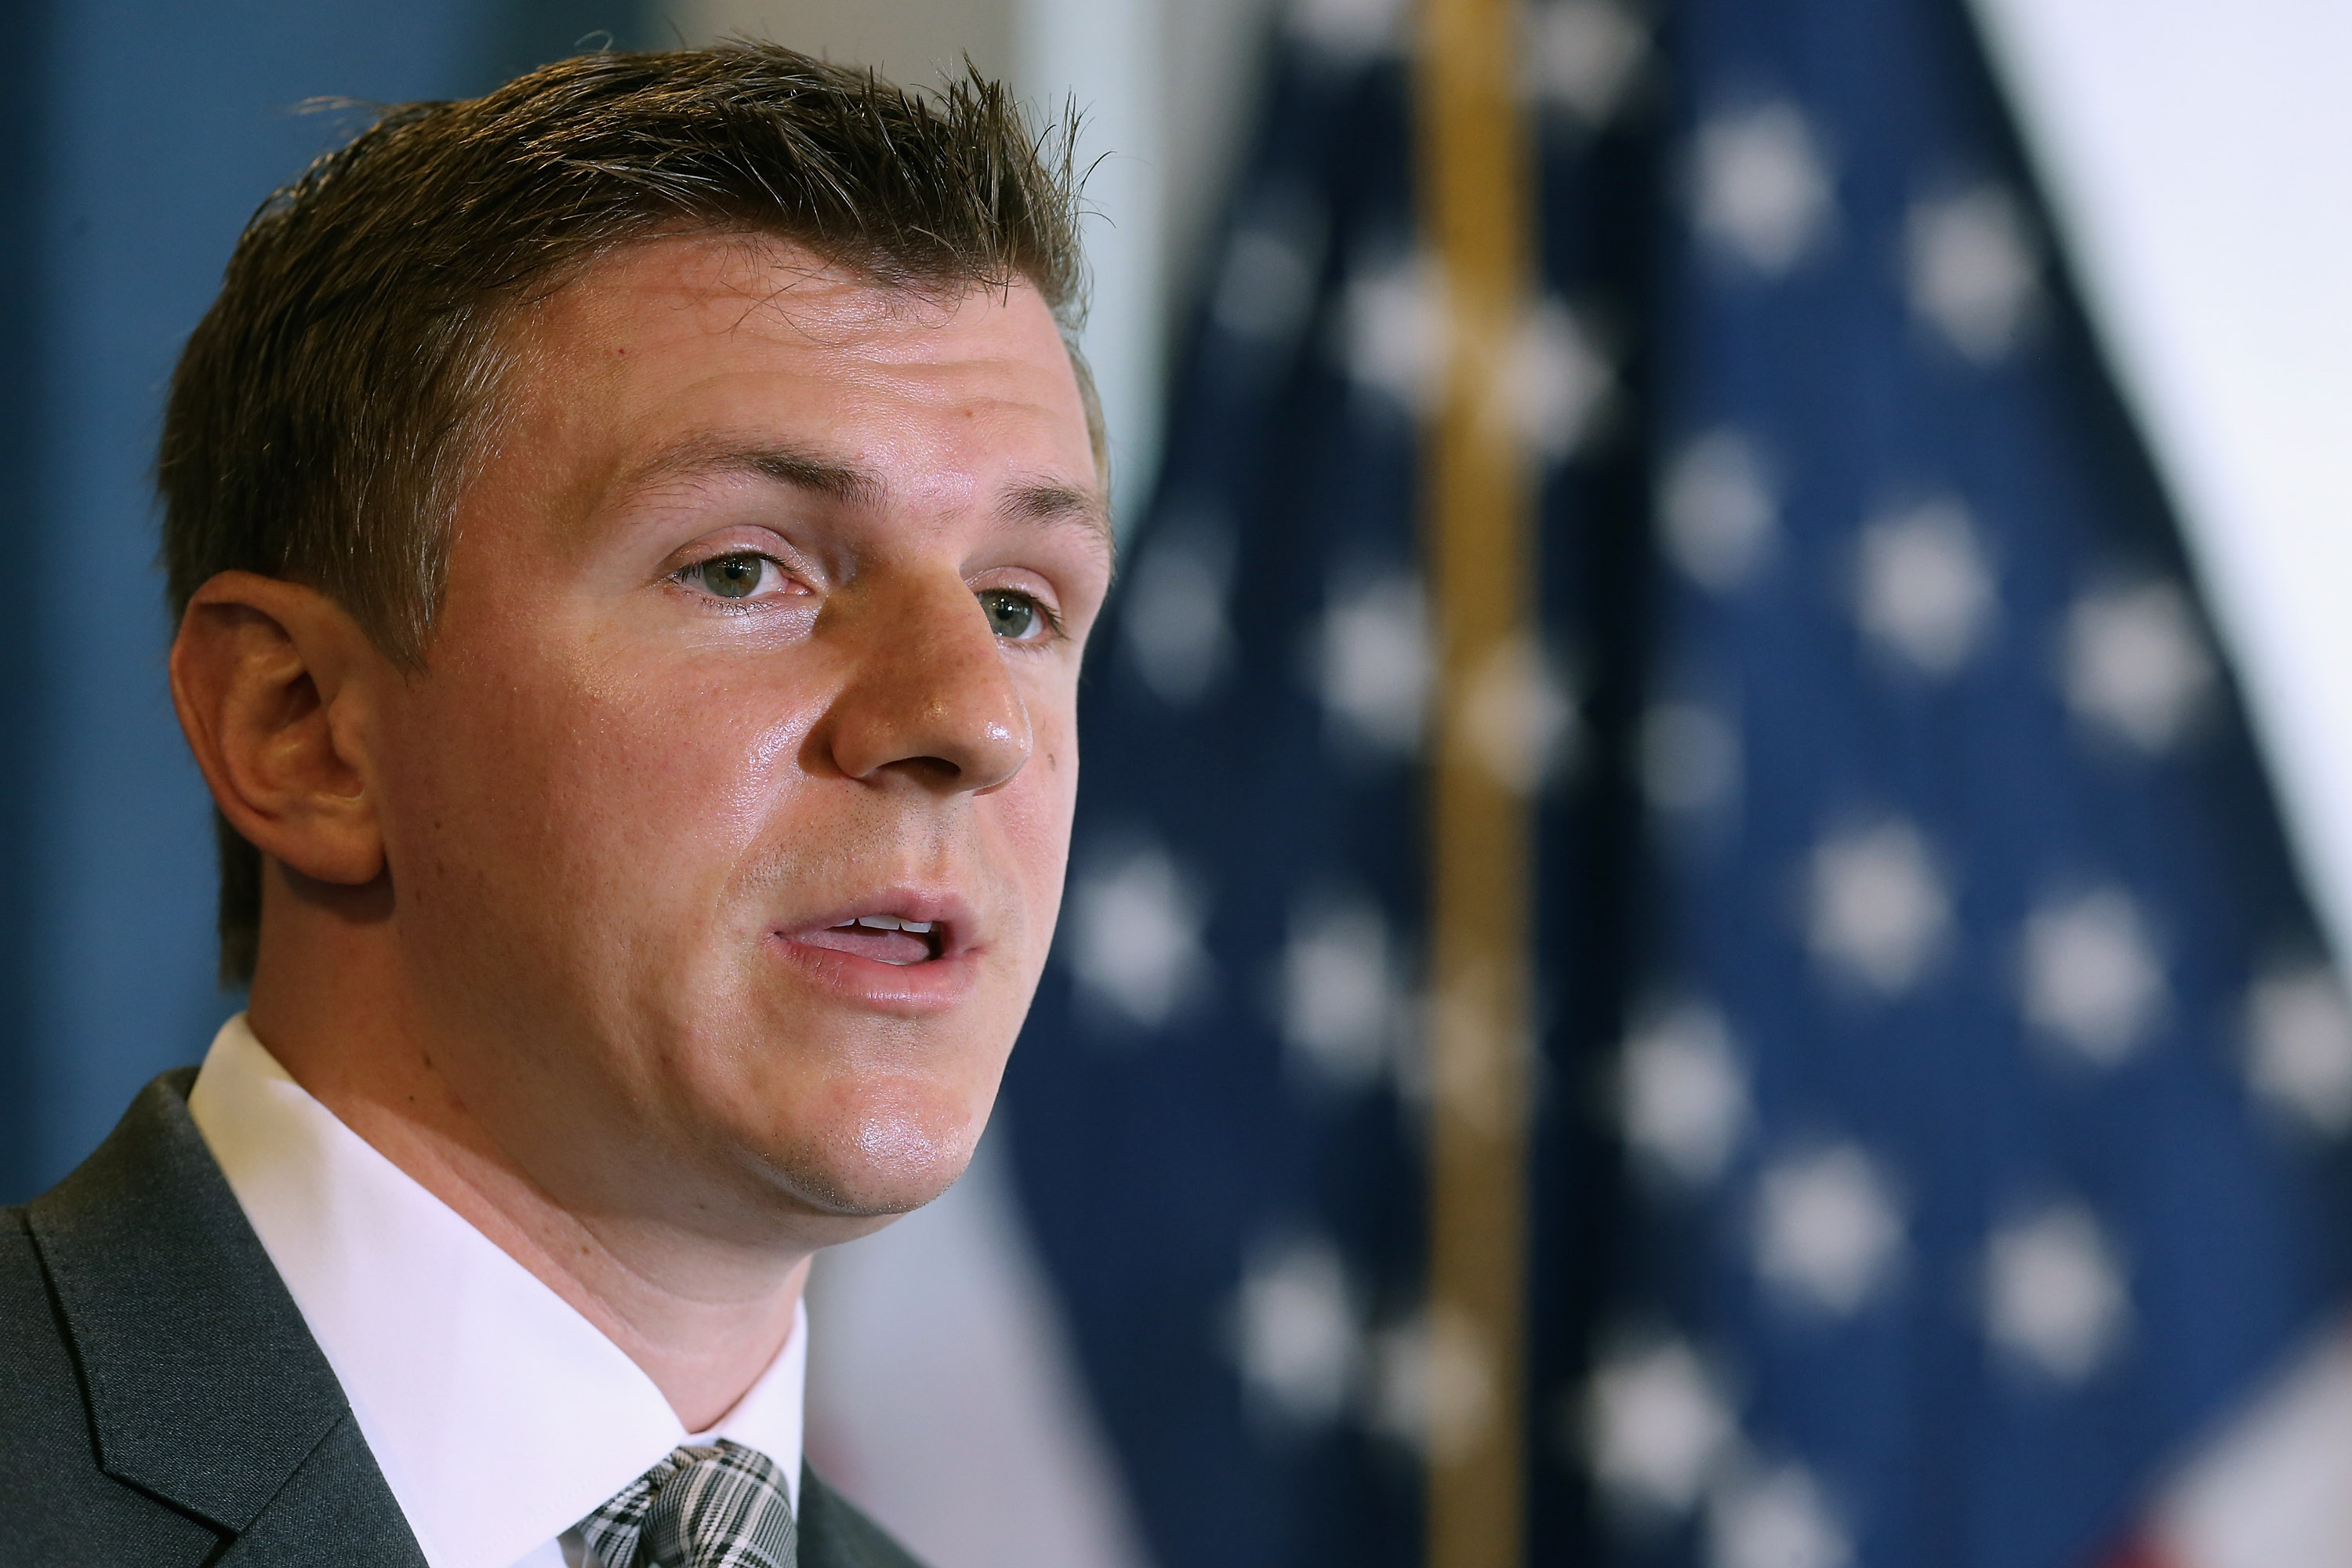 Conservative undercover journalist James O'Keefe (R) holds a news conference at the National Press Club in 2015. (Chip Somodevilla—Getty Images)